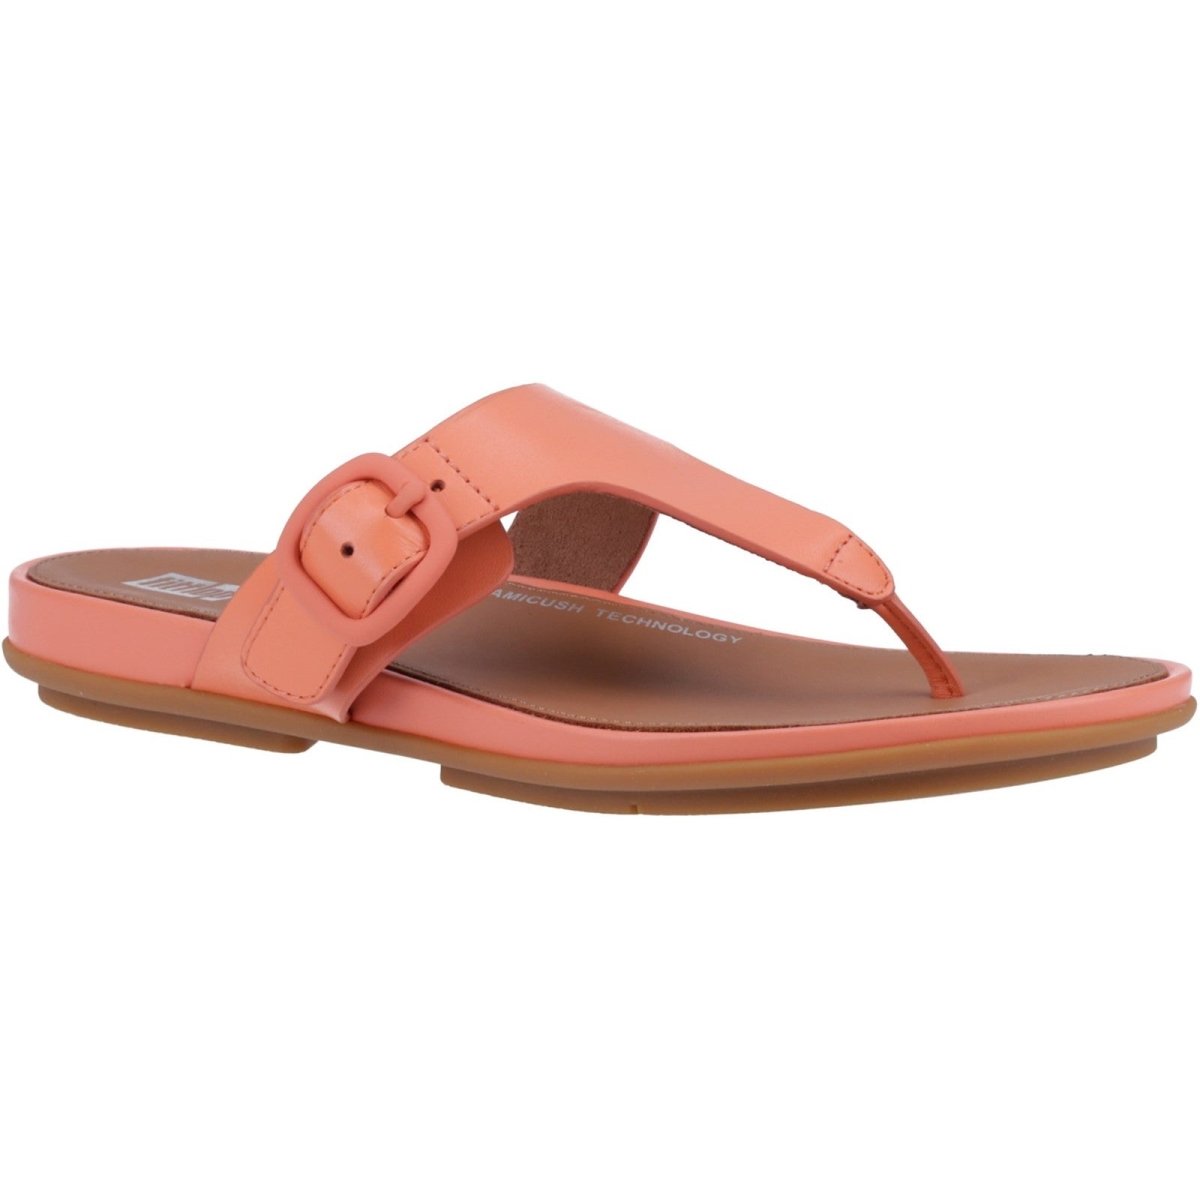 Fitflop Gracie Ladies Leather Summer Toe-Post Sandals - Shoe Store Direct